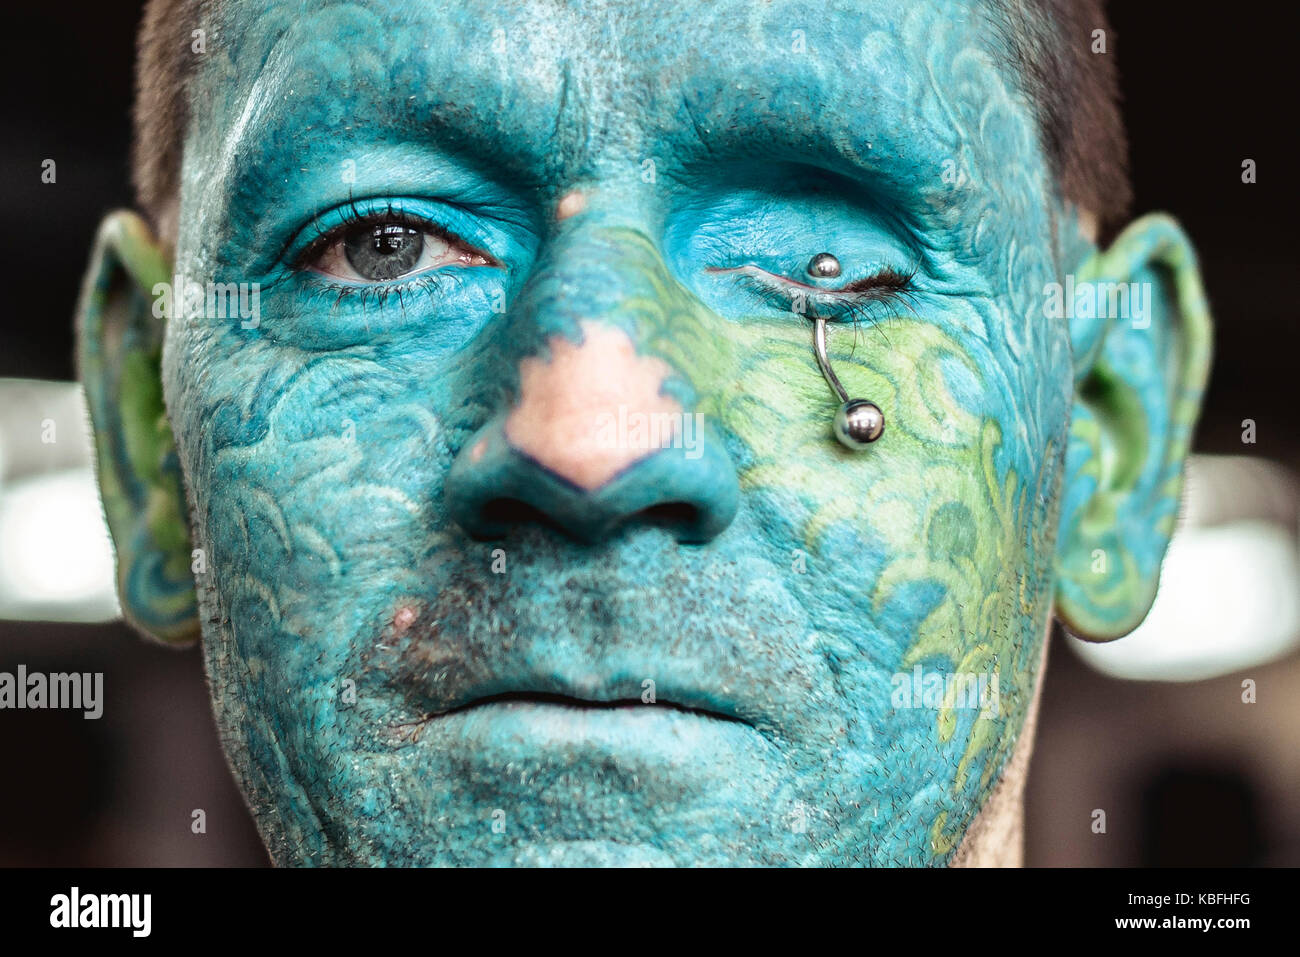 Barcelona, Spain. 30 September, 2017:  A tattoo enthusiast shows his full-face tattoo and eye piercing at the 20th International Barcelona Tattoo Expo. Credit: Matthias Oesterle/Alamy Live News Stock Photo